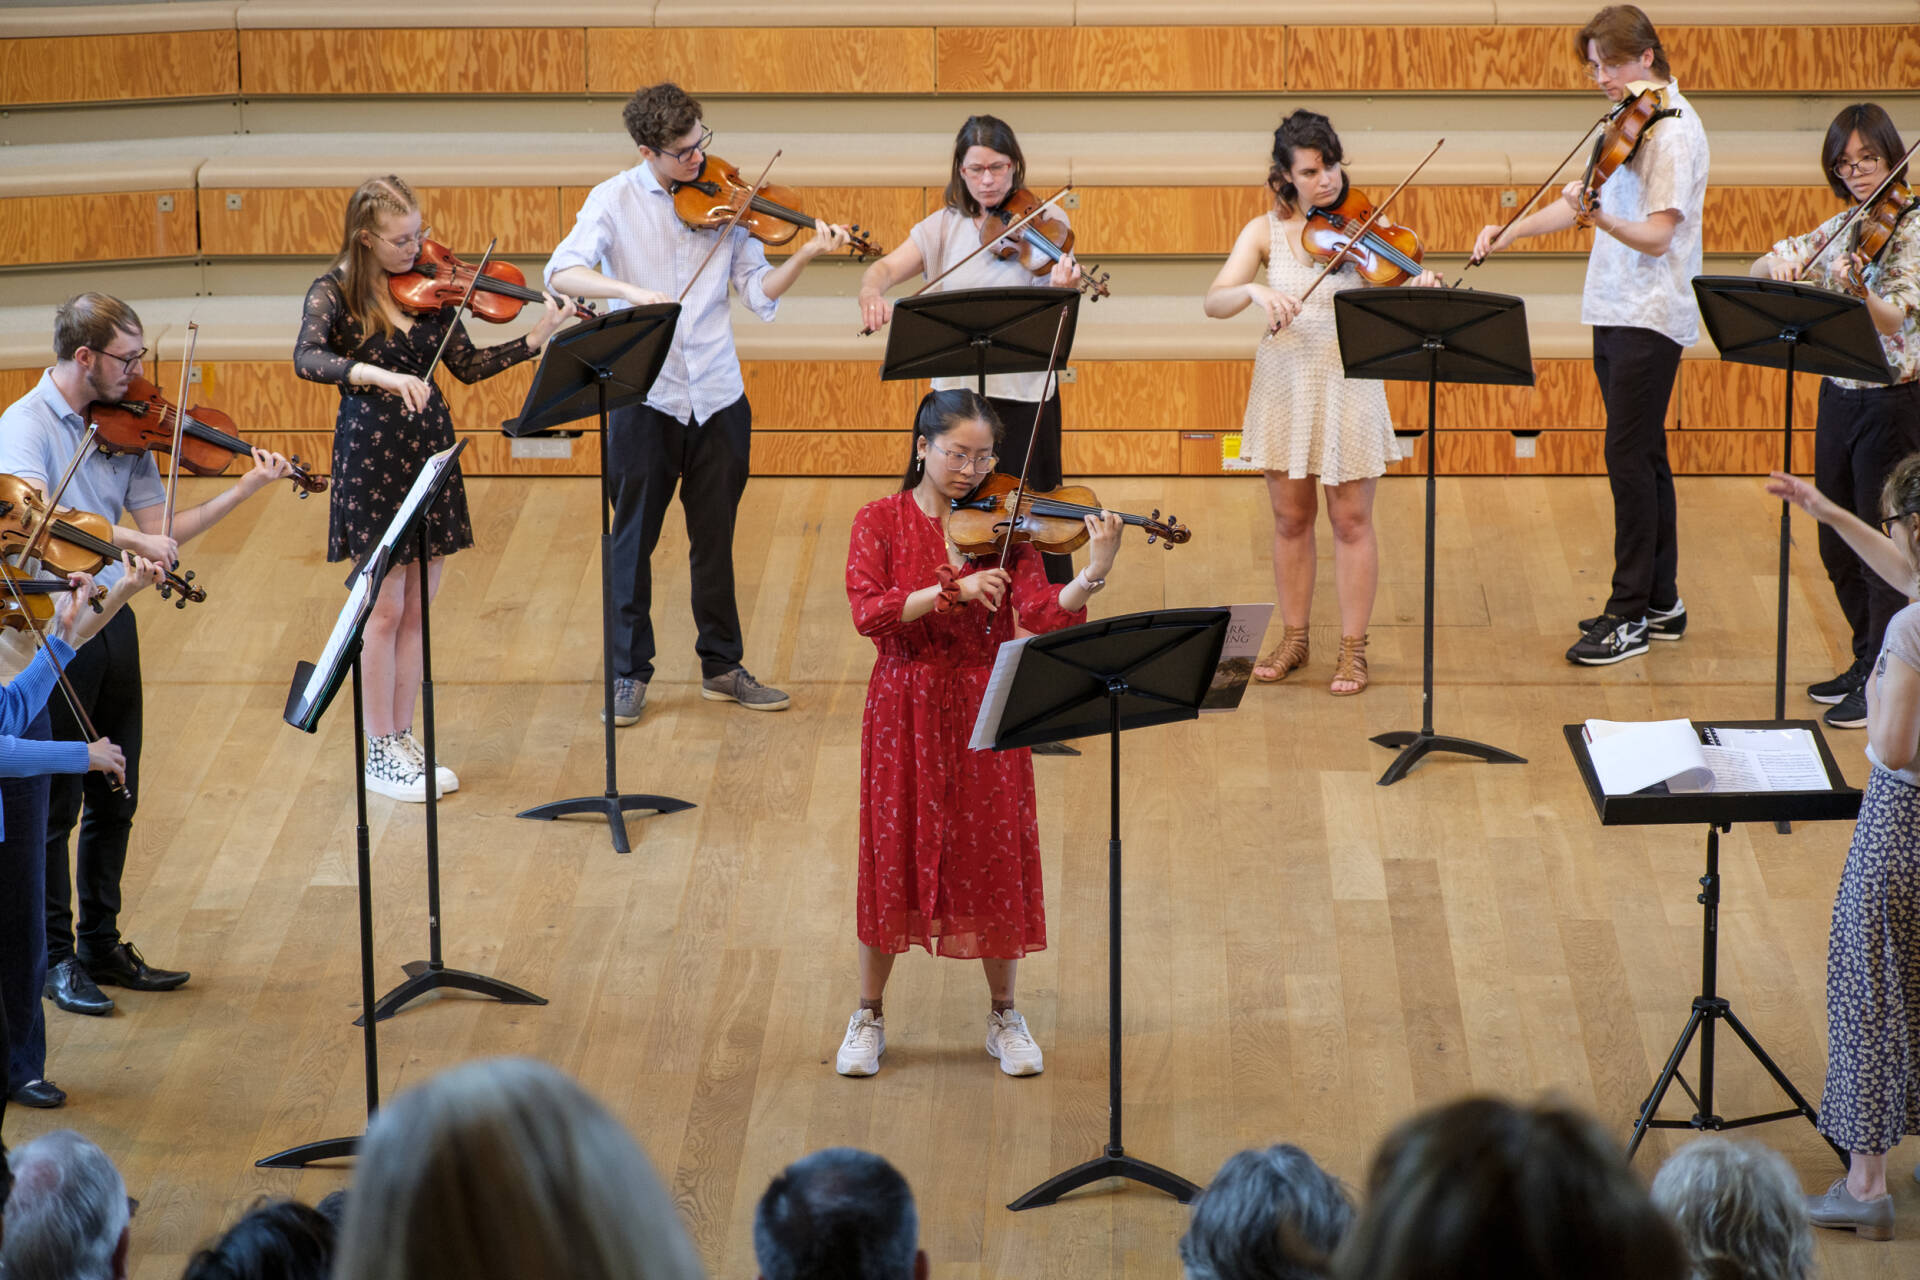 Group of string players performing in a concert-hall